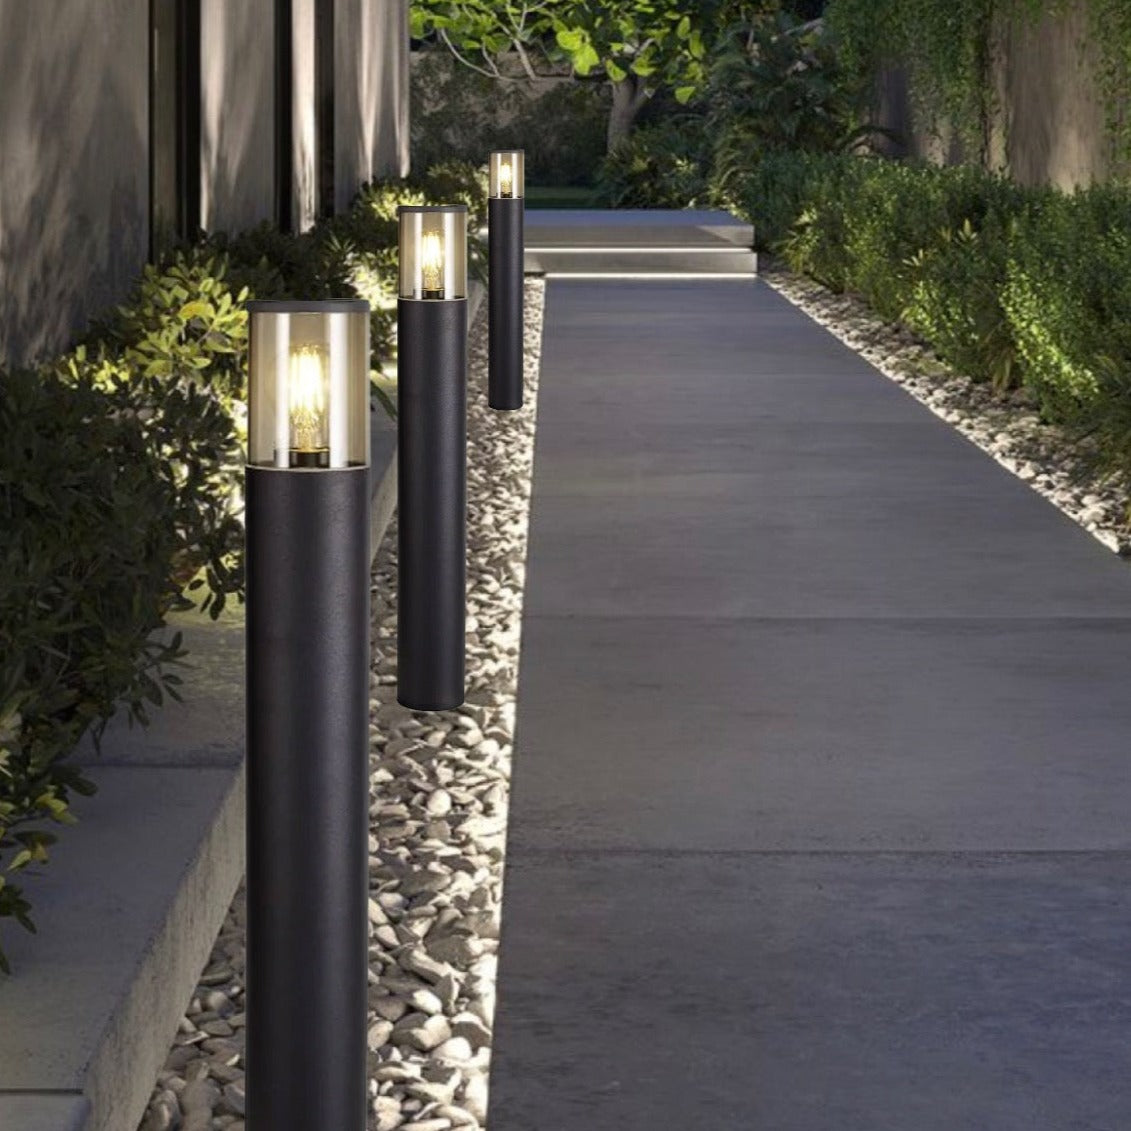 This post light is featured with a smoky diffuser, dark grey finish and ideal for outdoor use. Measuring around 50cm in height, this elegantly designed pillar light blends with either modern or traditional houses. The extended height of this product (compared to our medium dark grey post light) allows it to sho